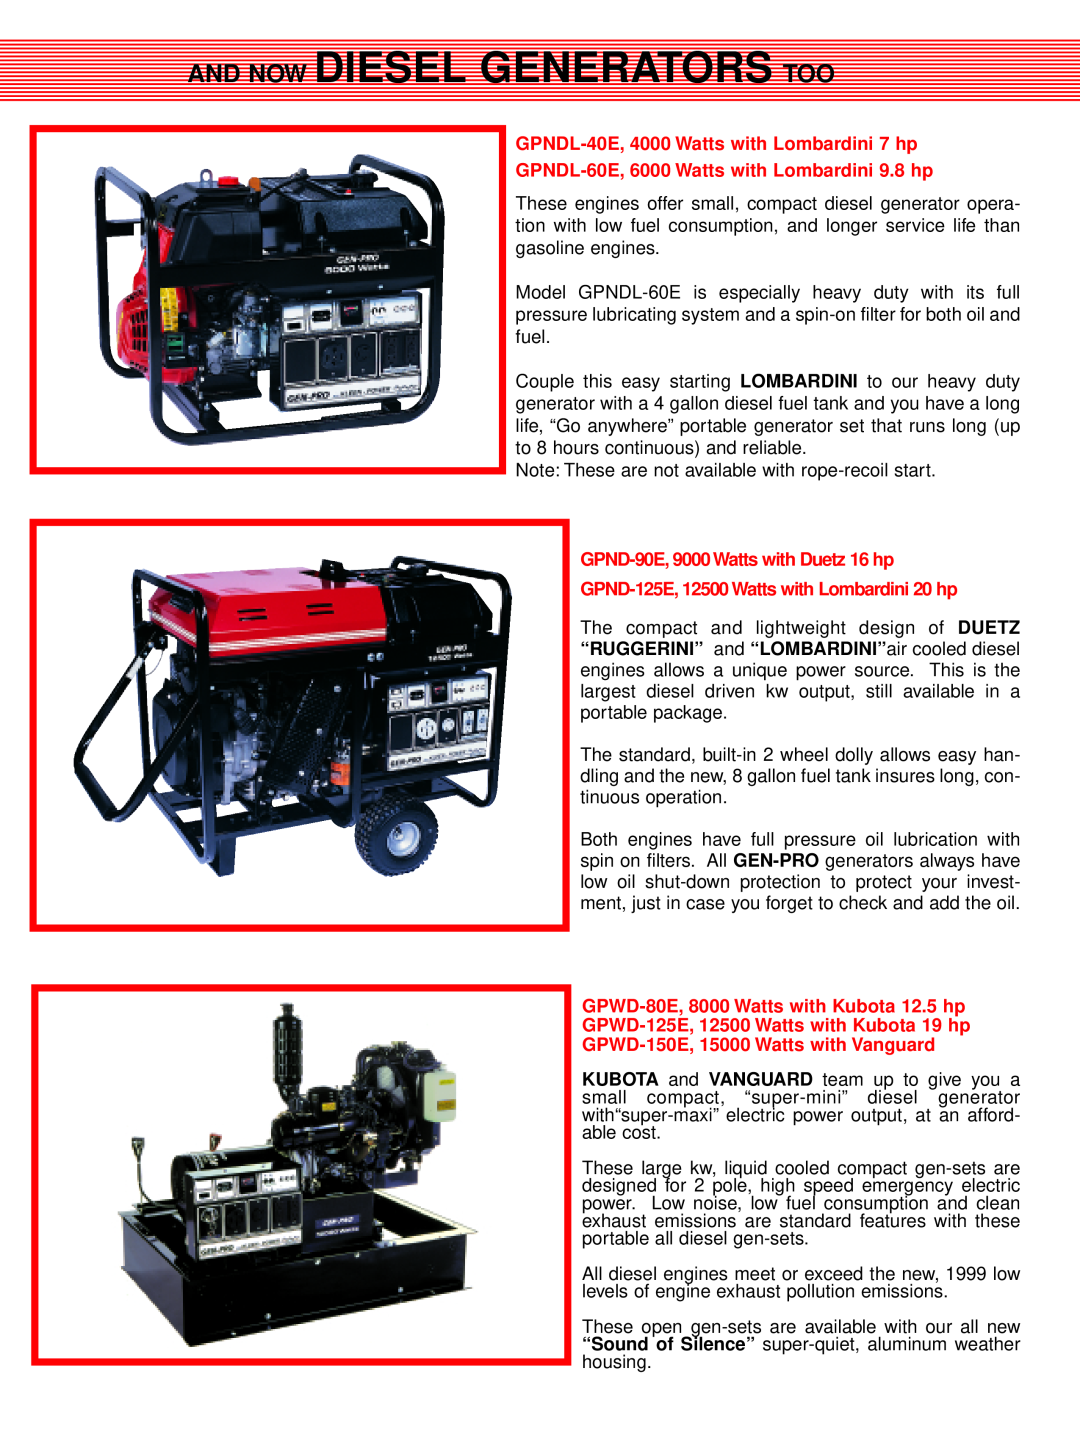 Gillette PORTABLE GENERATORS manual And Now Diesel Generators Too, GPNDL-40E,4000 Watts with Lombardini 7 hp 